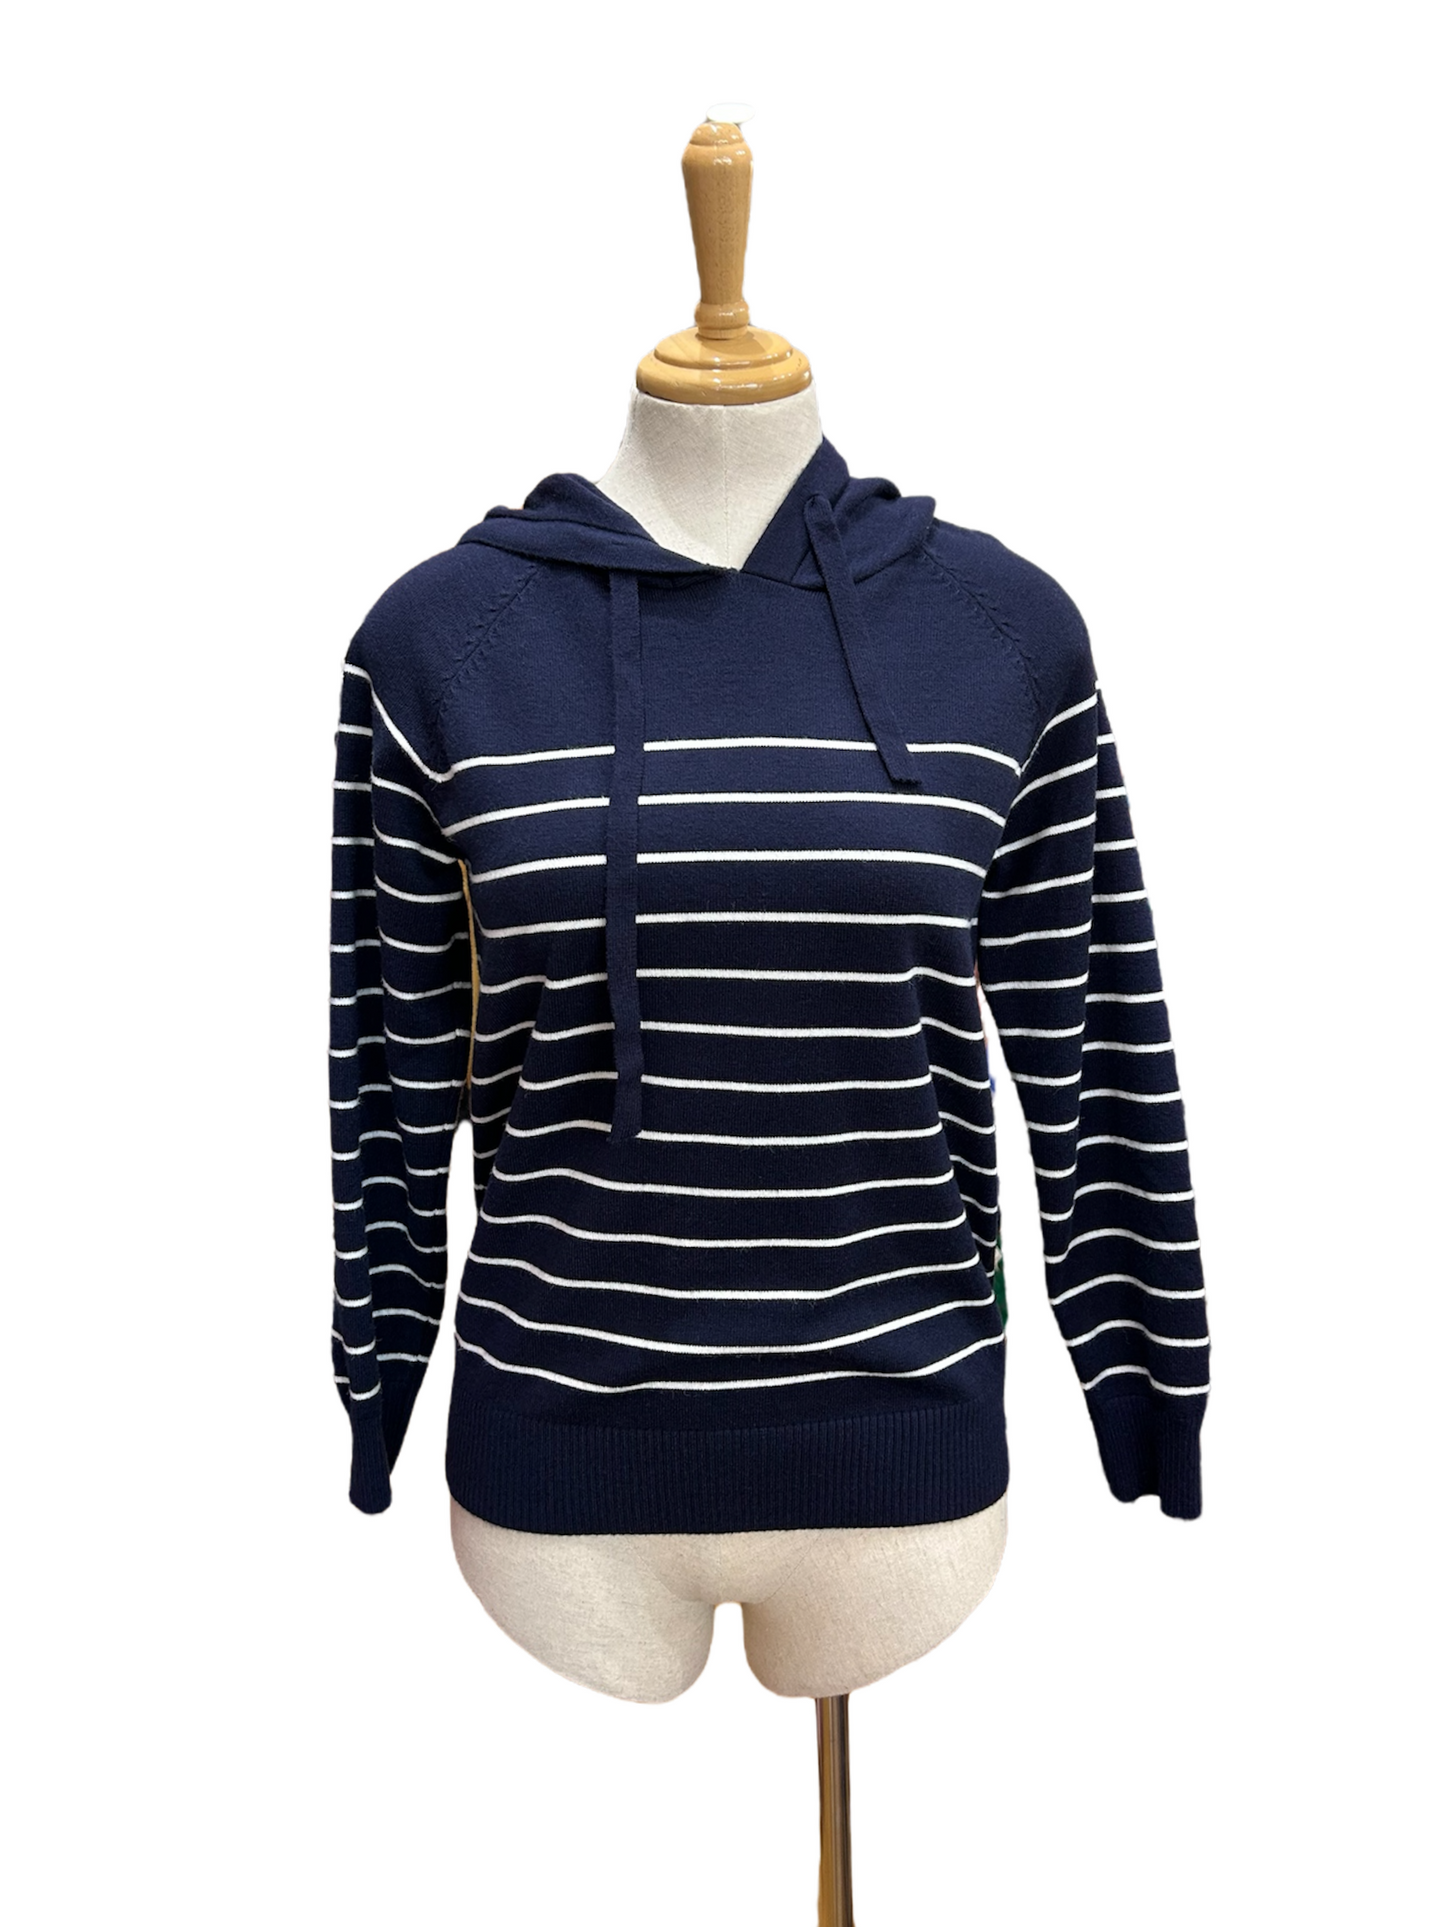 Soft Knit hooded Stripes Sweater (2 Colours Available)